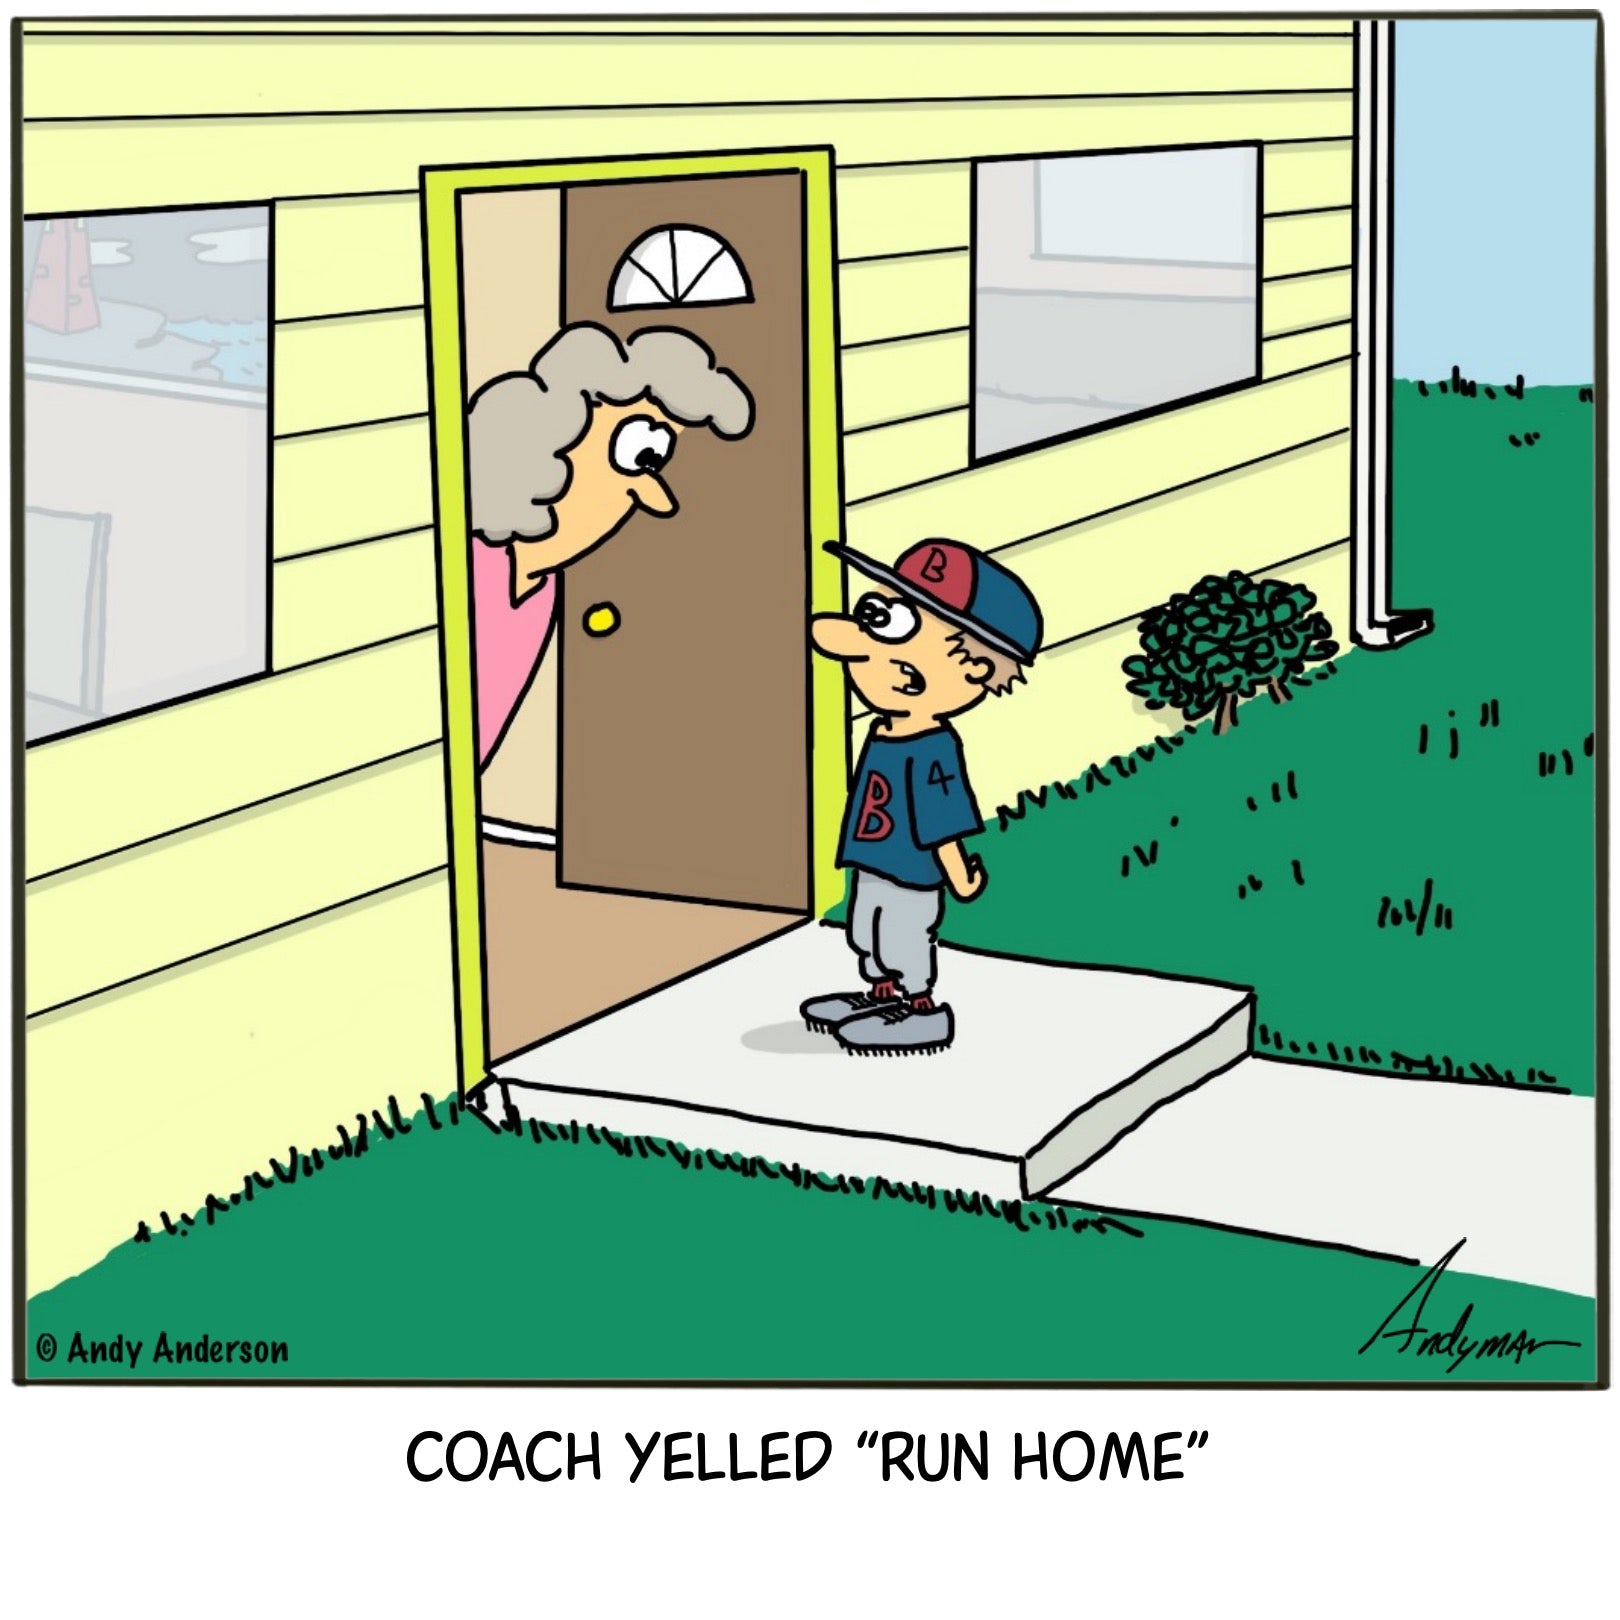 Coach yelled run home cartoon by Andy Anderson